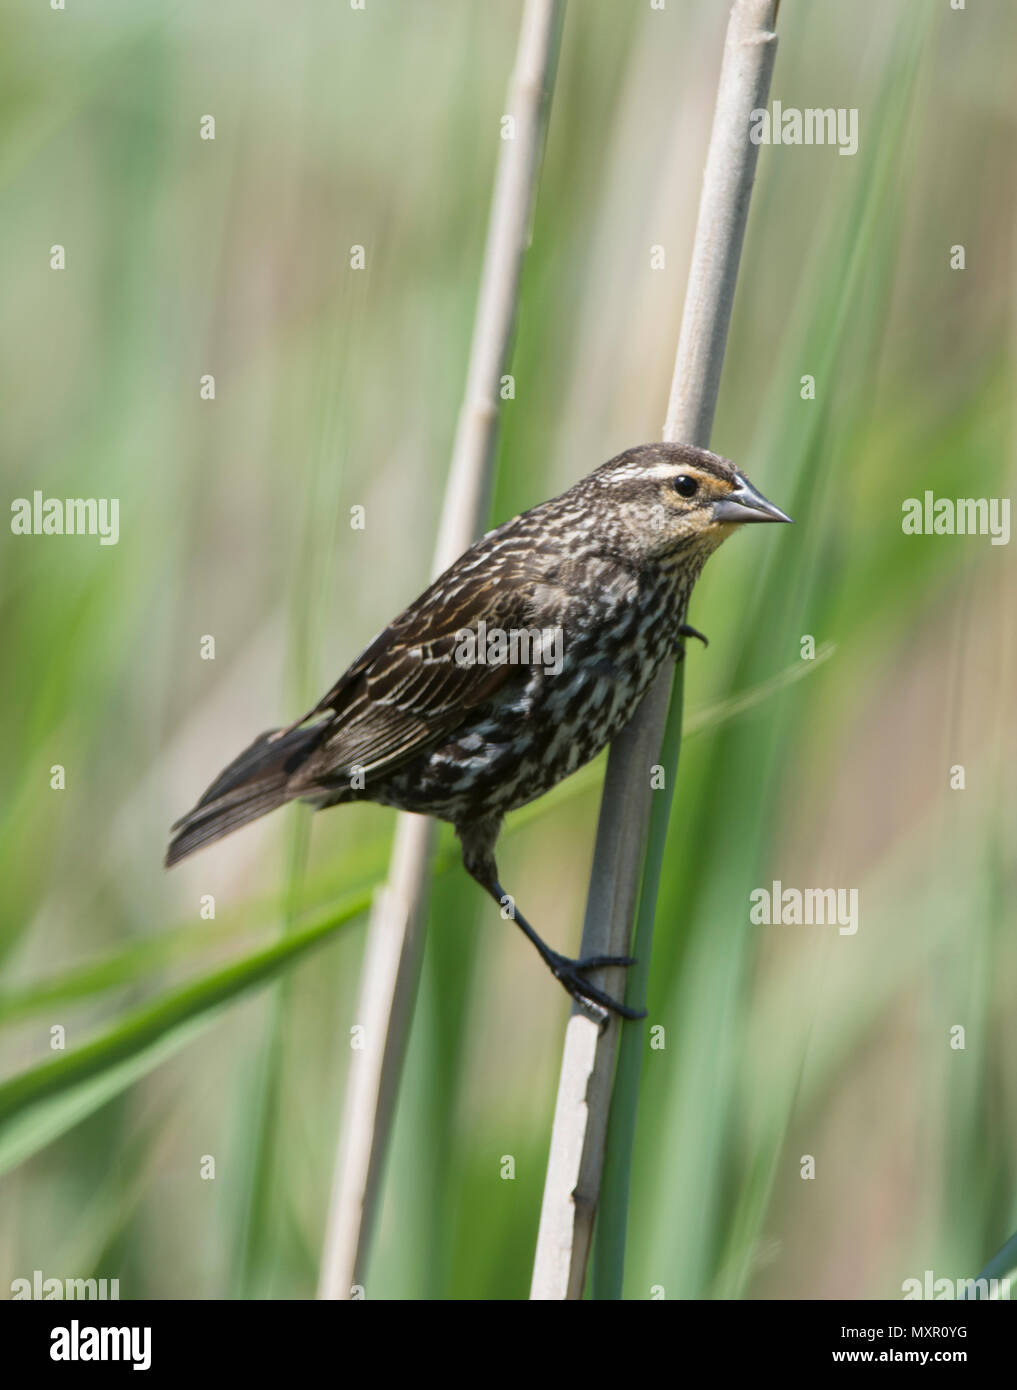 A female Red Winged blackbird (Agelaius phoeniceus) in a Cape Cod pond, Massachusetts, USA Stock Photo